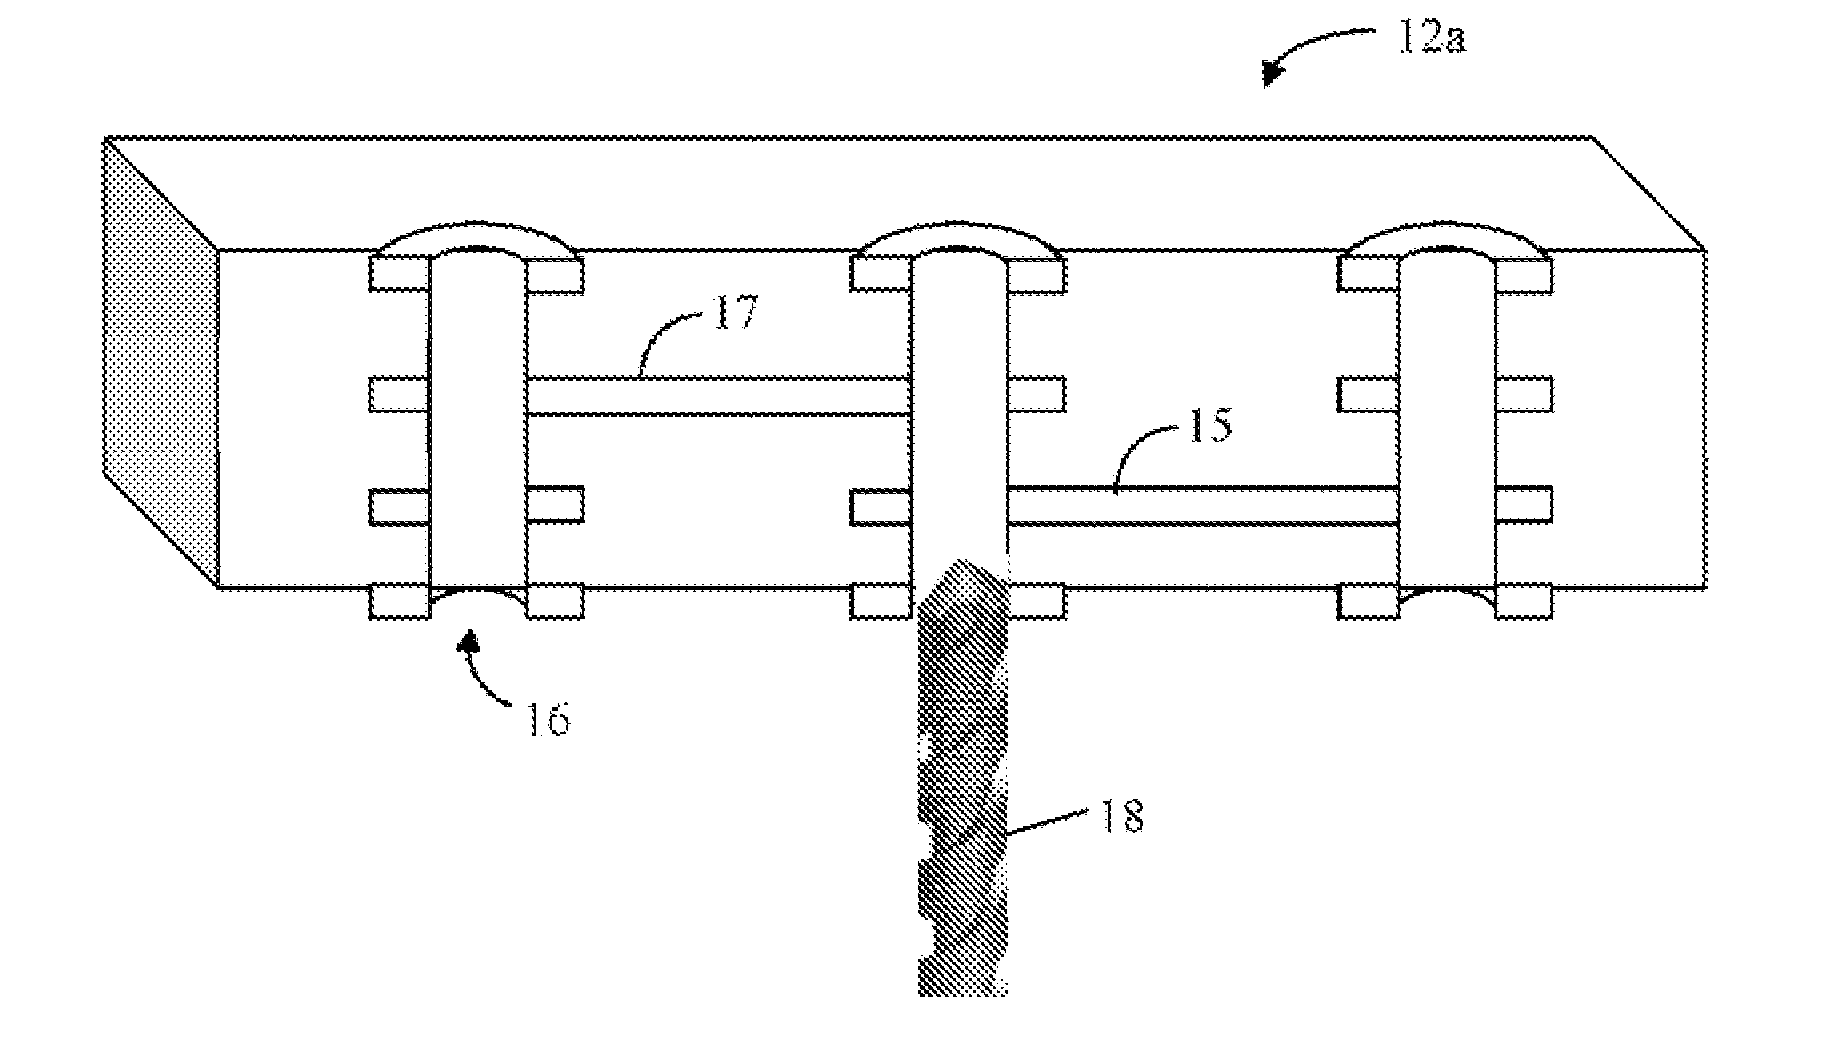 Method of processing a circuit board